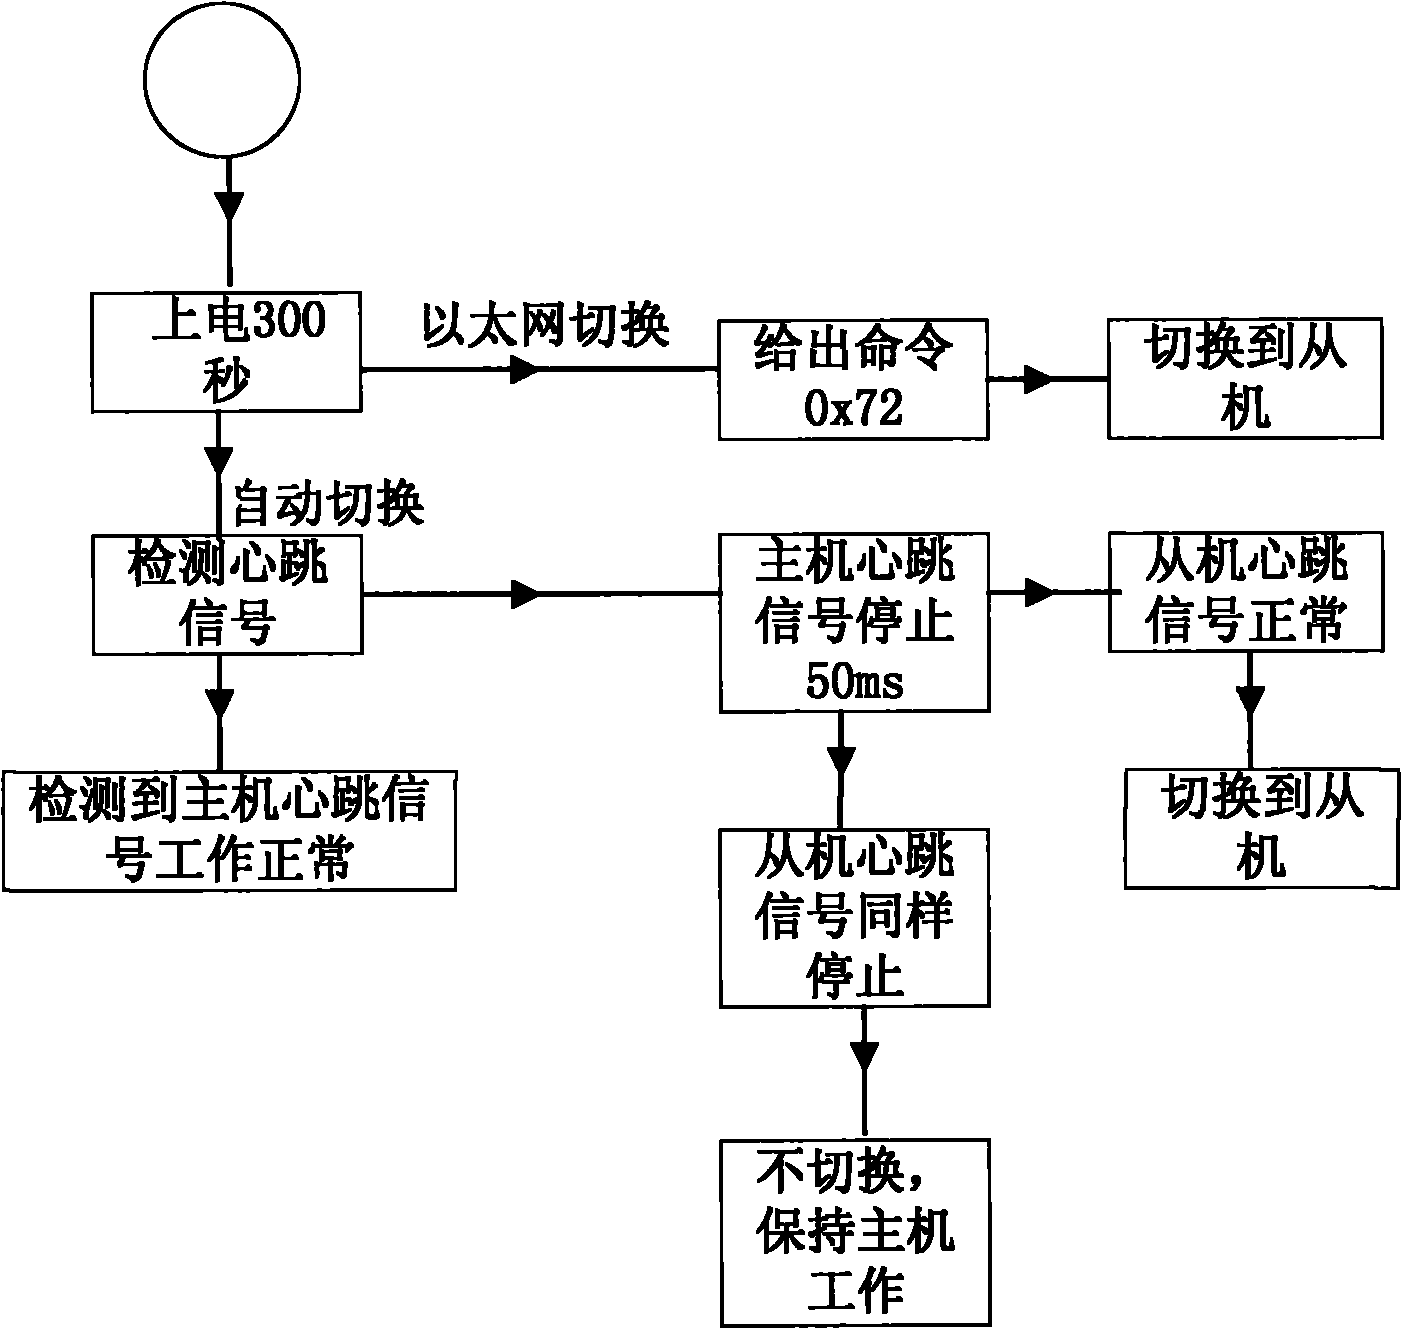 Redundancy switching circuit used for ground test launch and control system of carrier rocket